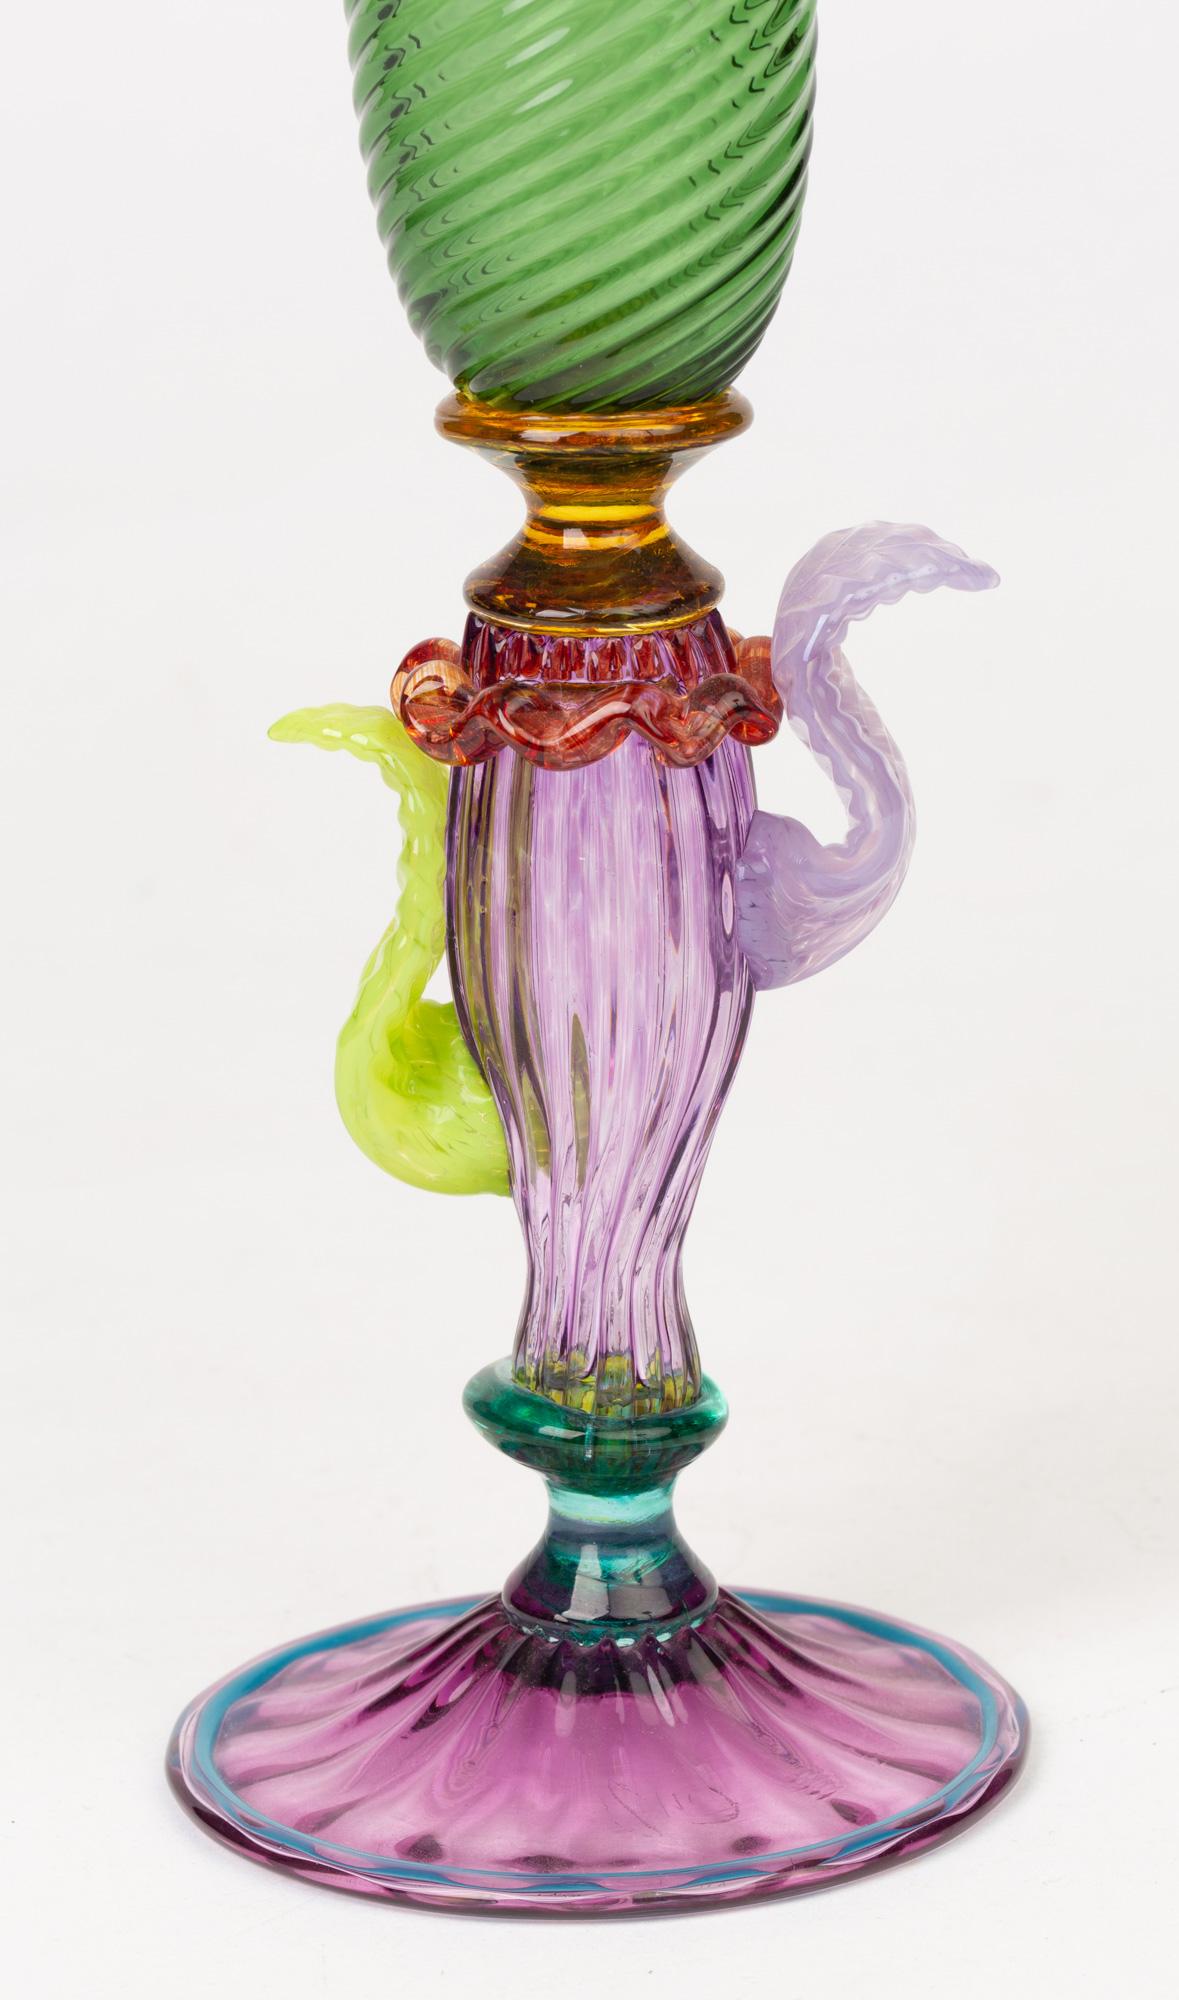 A stunning and elegant Italian Murano Renaissance Revival art glass stem vase designed by Antonio Salviati in the late 19th century. This tall glass vase stands on a wide domed and molded amethyst glass foot with blue piping around the rim with a